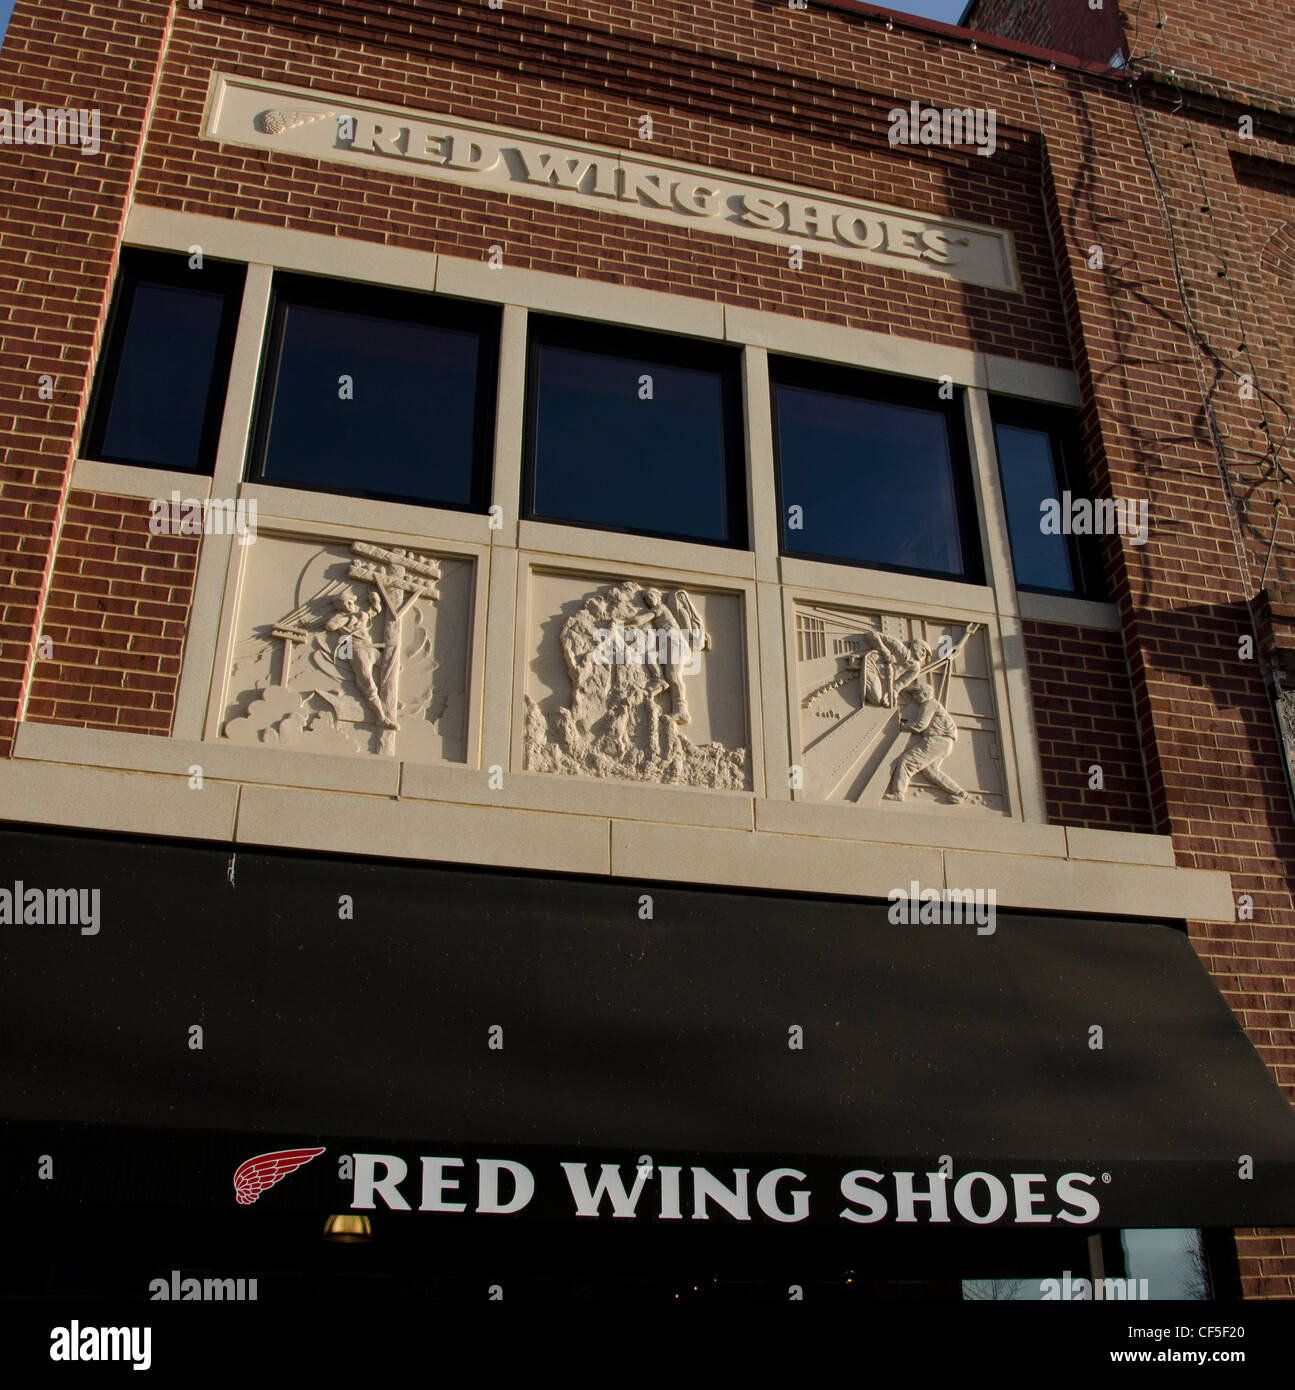 Red Wing Shoes, famous shoemaker, in Red Wing, Minnesota. Stock Photo